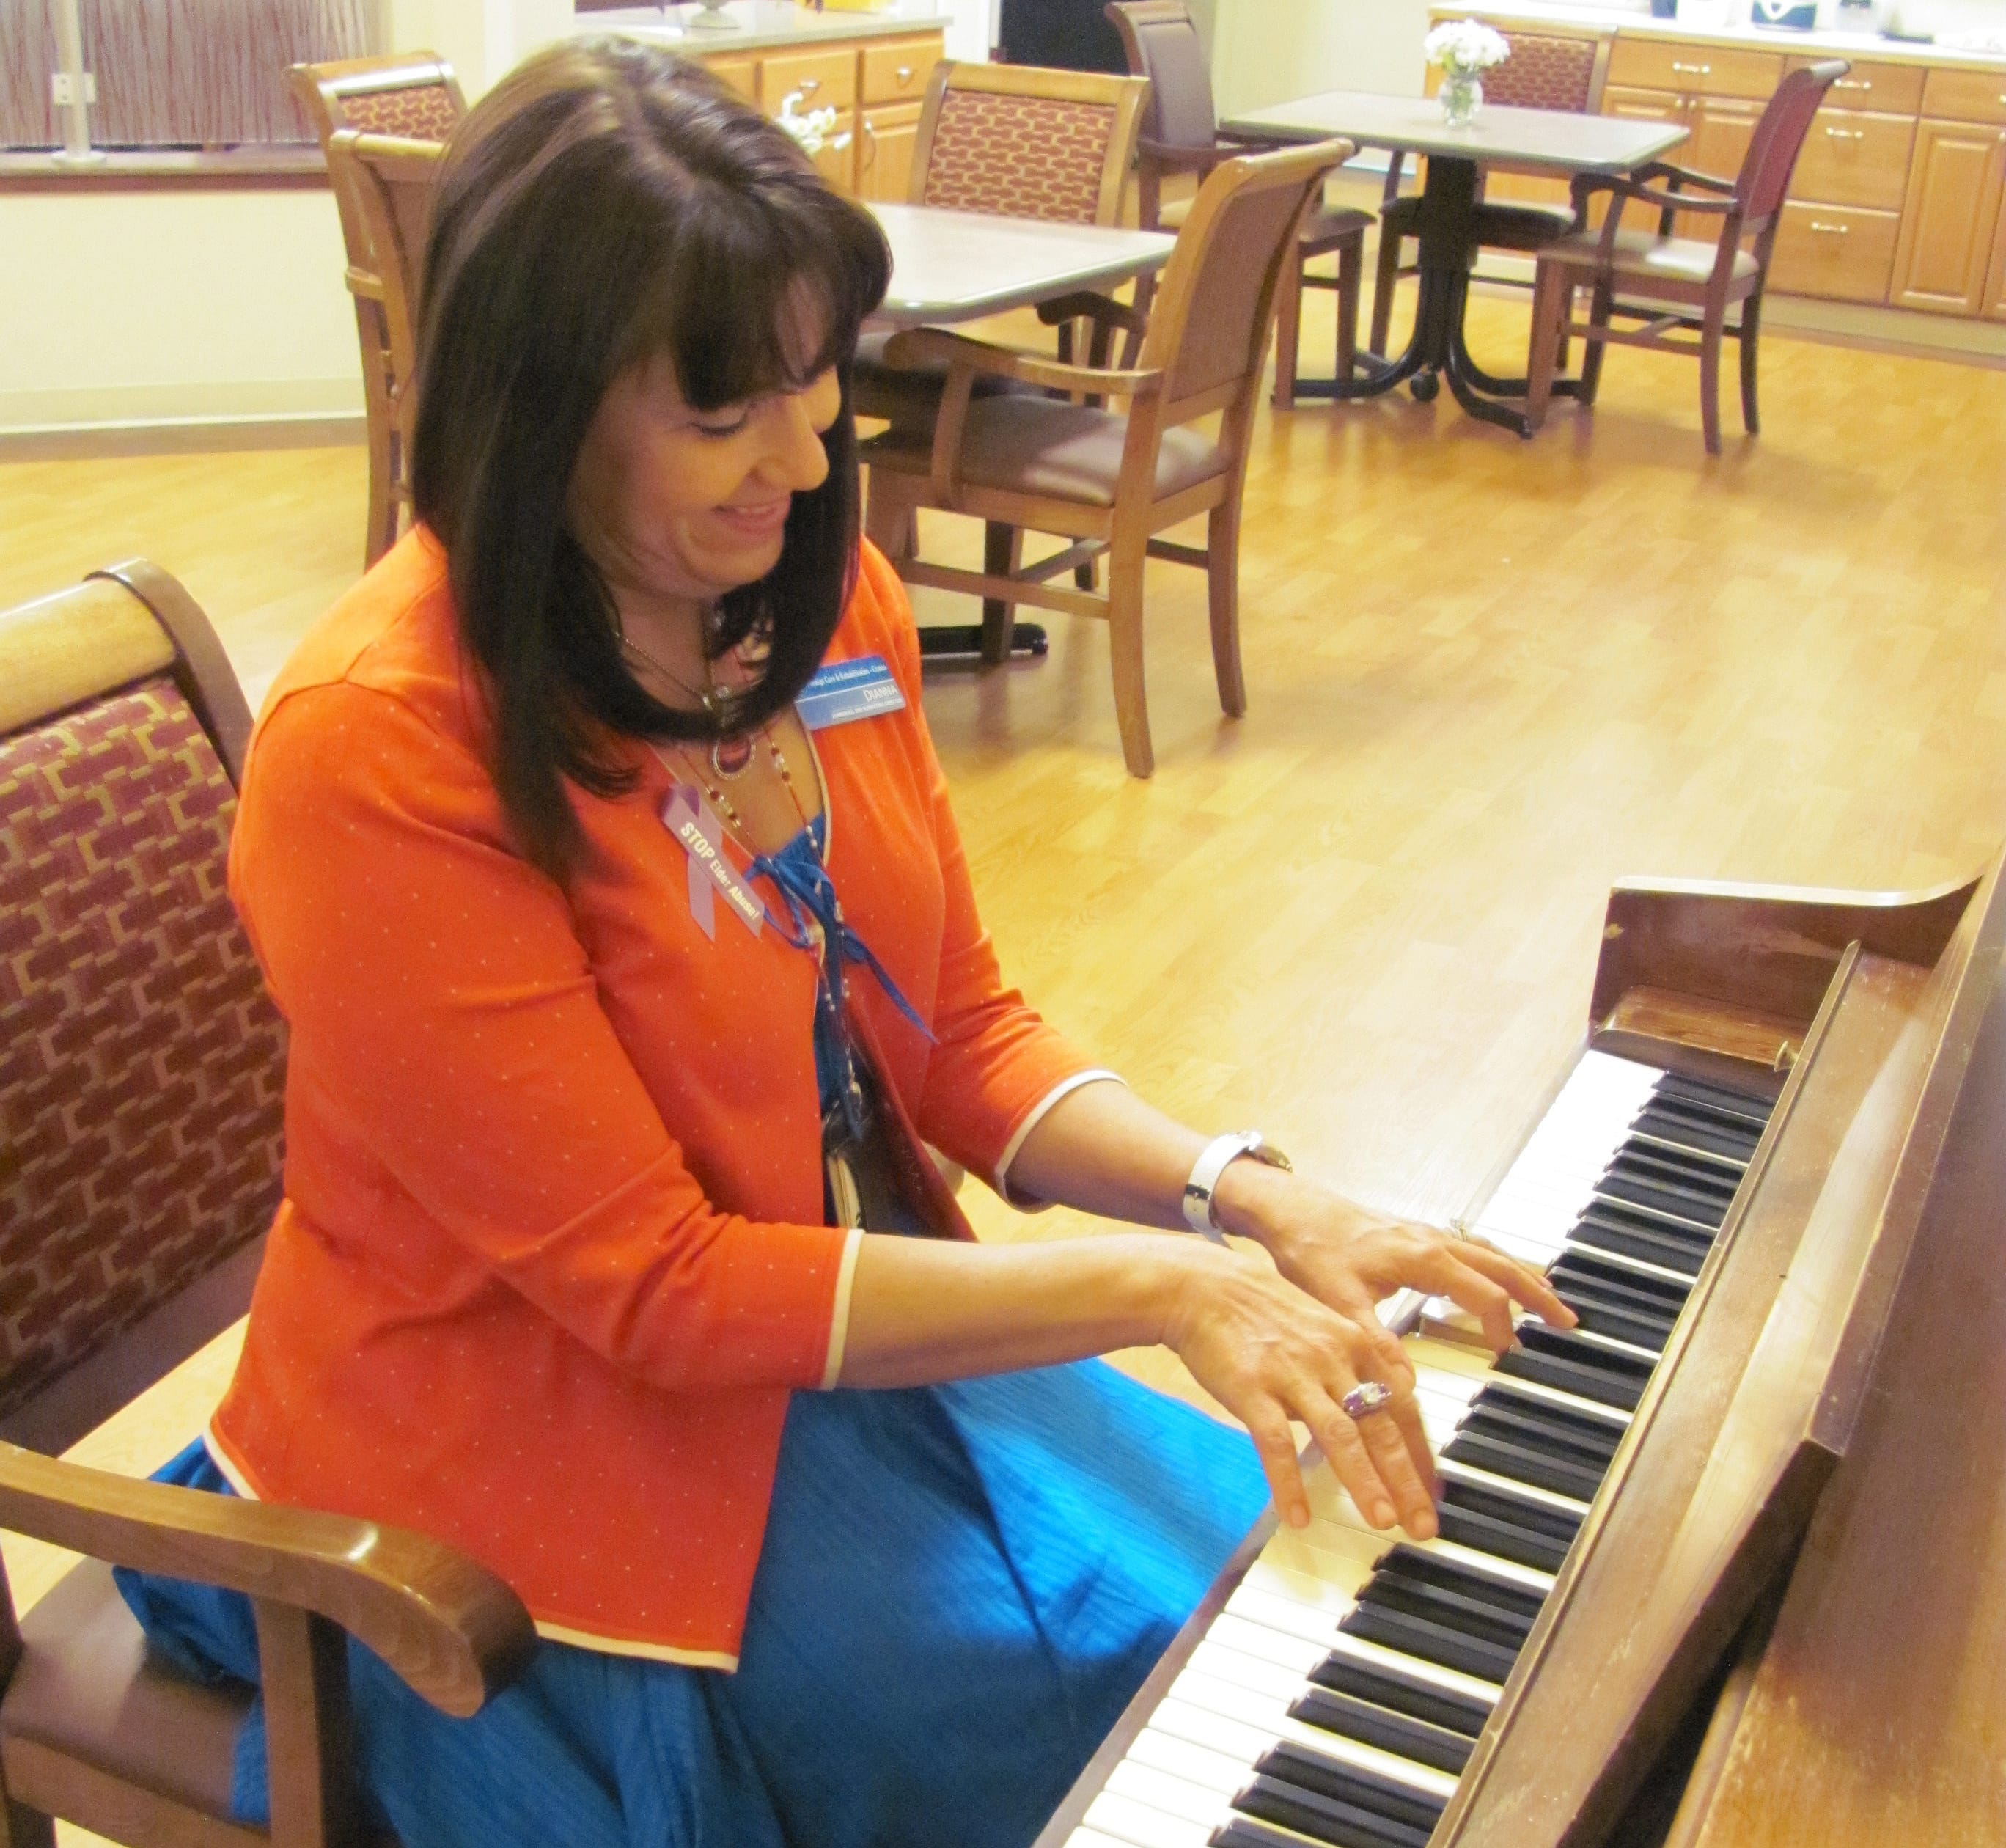 Dianna Kretzschmar plays the piano at Prestige Care and Rehabilitation, in Camas, and other locations throughout Clark County. She is the director of admissions and marketing at Prestige.